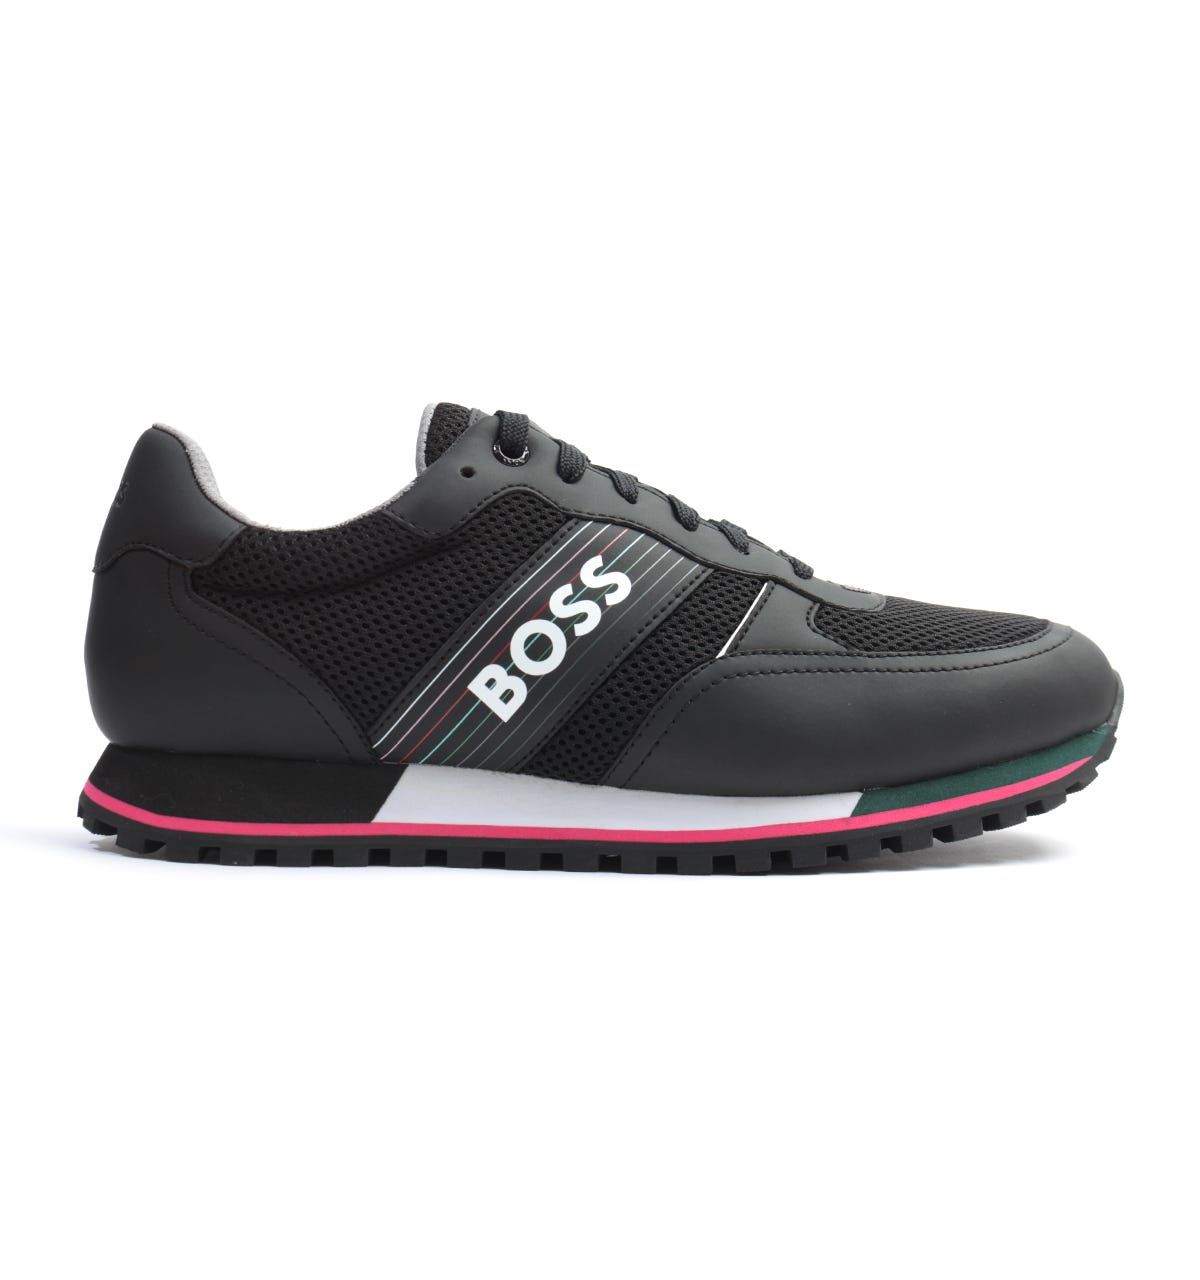 BOSS offers up a fresh new design for this season. These trend-driven trainers are constructed from a mix of nylon, leather and suede and a lightweight rubber sole, meant to take you distances. The contemporary design keeps a stylish look with the mesh panelling to the upper and contrast detailing. Featuring a memory-foam insole for optimum comfort. The look is completed with a seasonal stripe logo and further branding to the heel, tongue and sole.Nylon, Leather & Suede Upper, Mesh Panelling, Textile Lining, Ortholite Memory Foam Insole, EVA Rubber Sole, Seven Eyelet Lace Up, Signature Stripe Detailing, BOSS Branding.